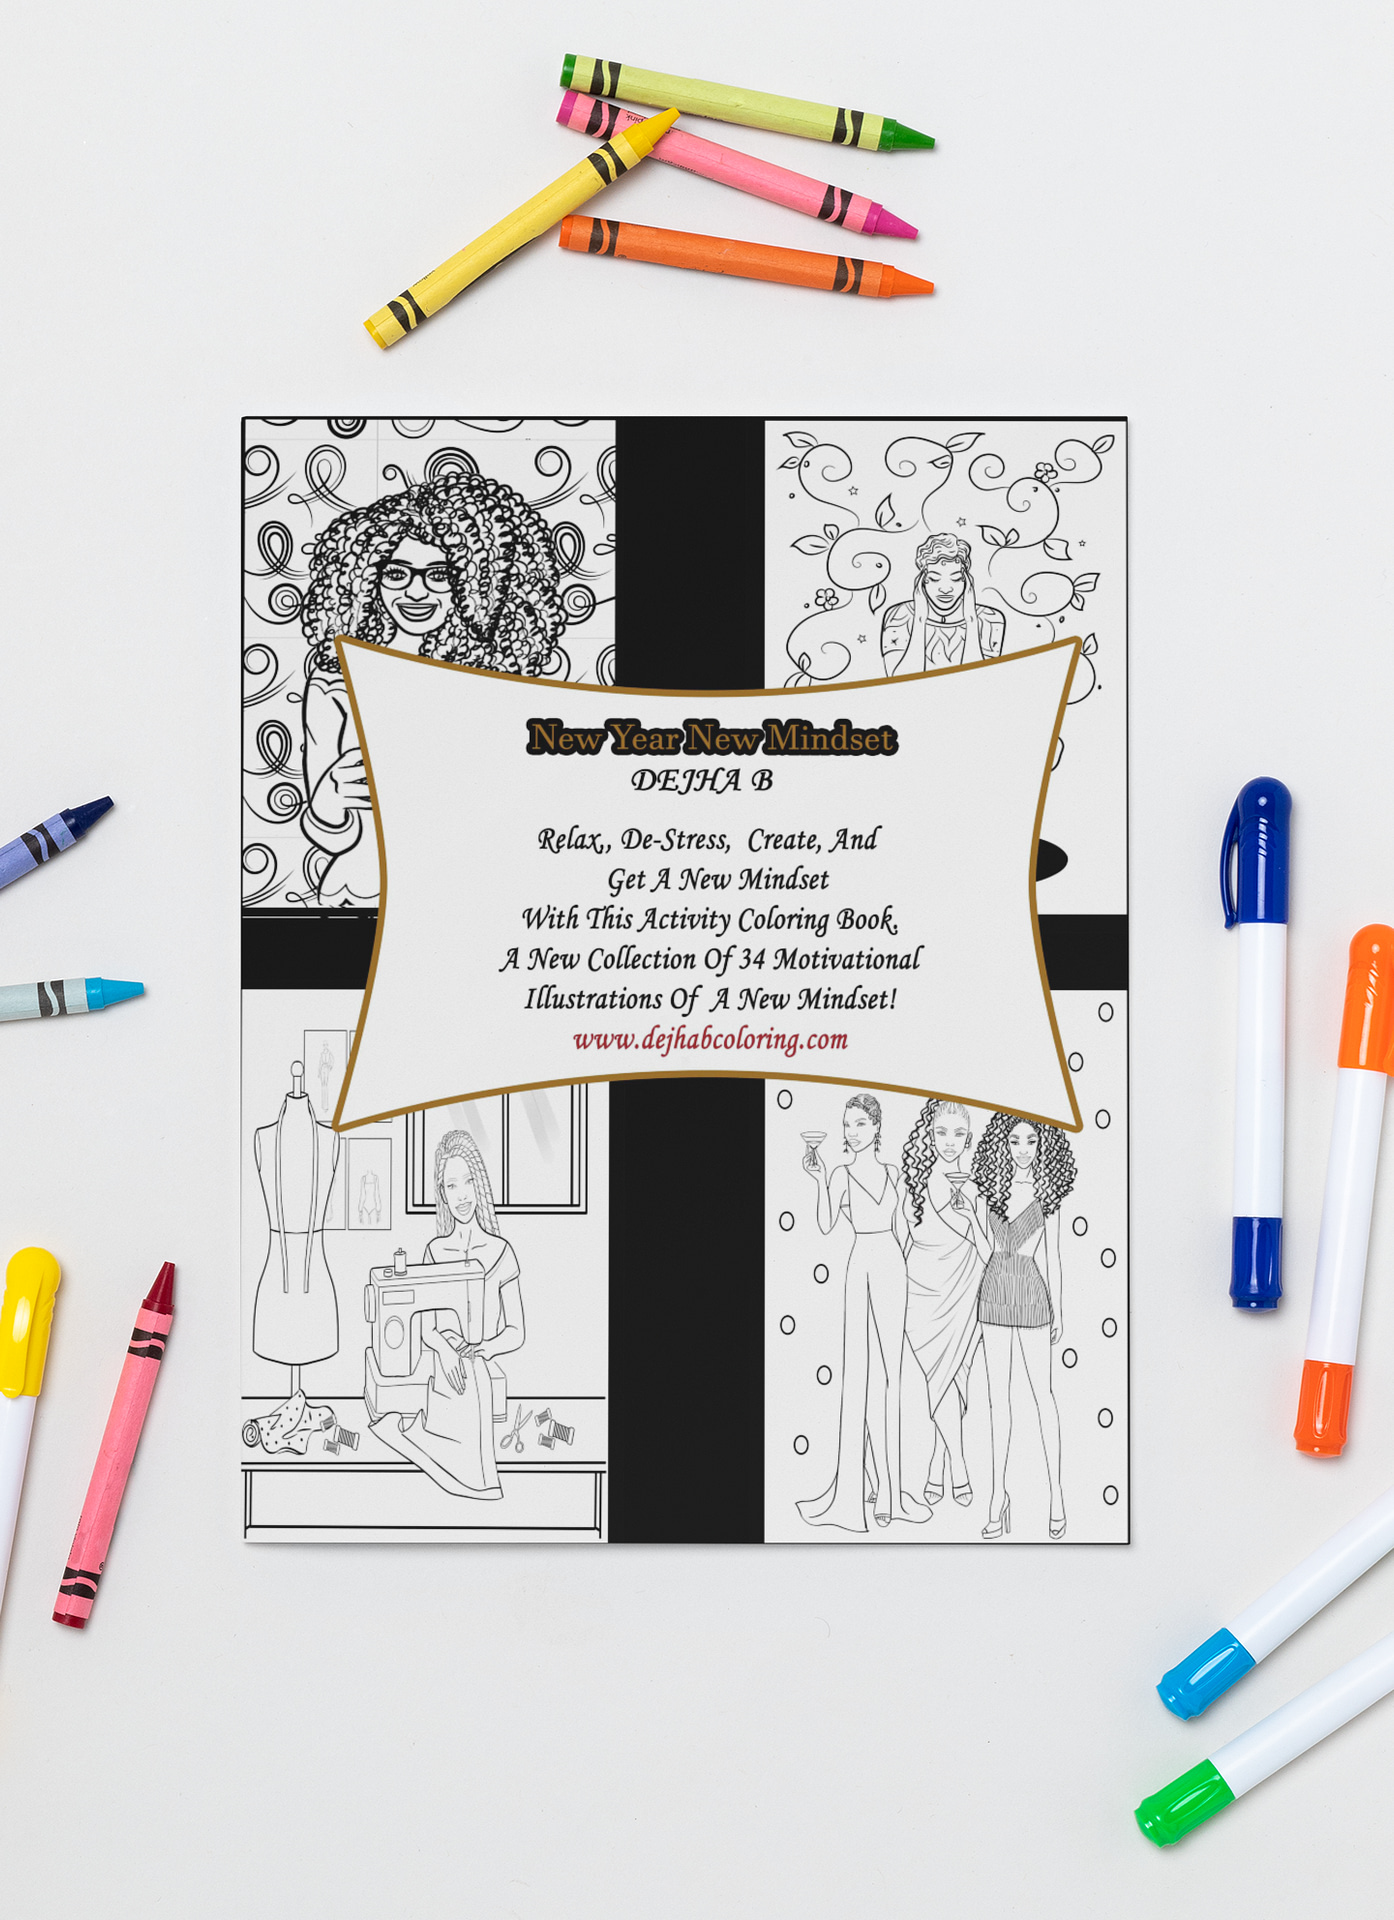 New Year New Mindset Adult Coloring Book Color and Sip Kit - Dejha